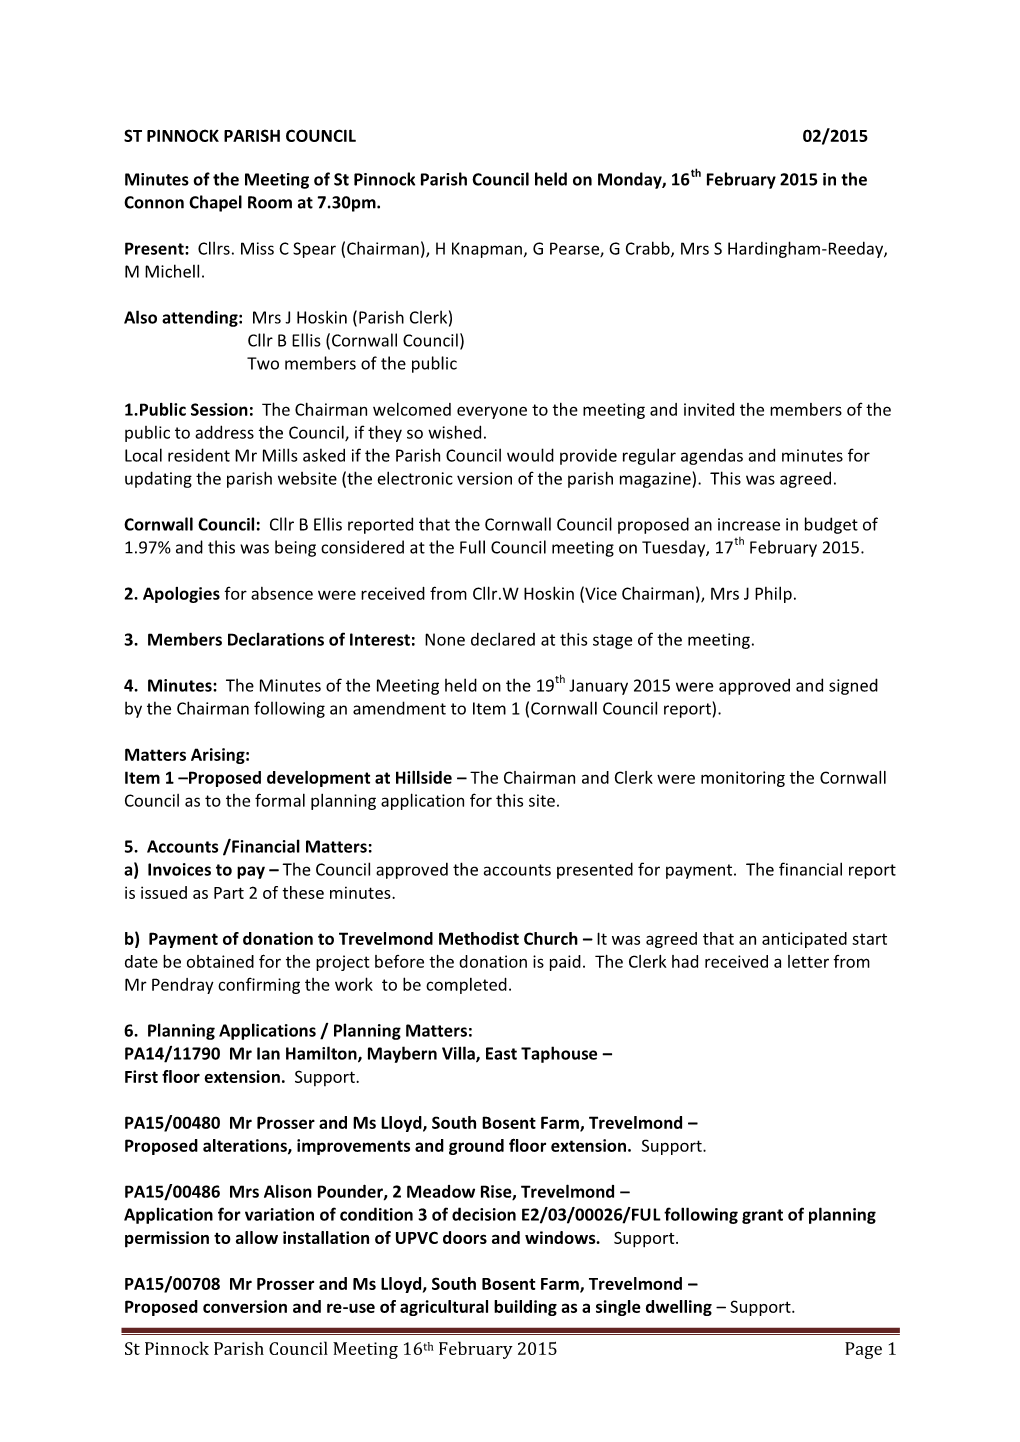 St Pinnock Parish Council Meeting 16Th February 2015 Page 1 ST